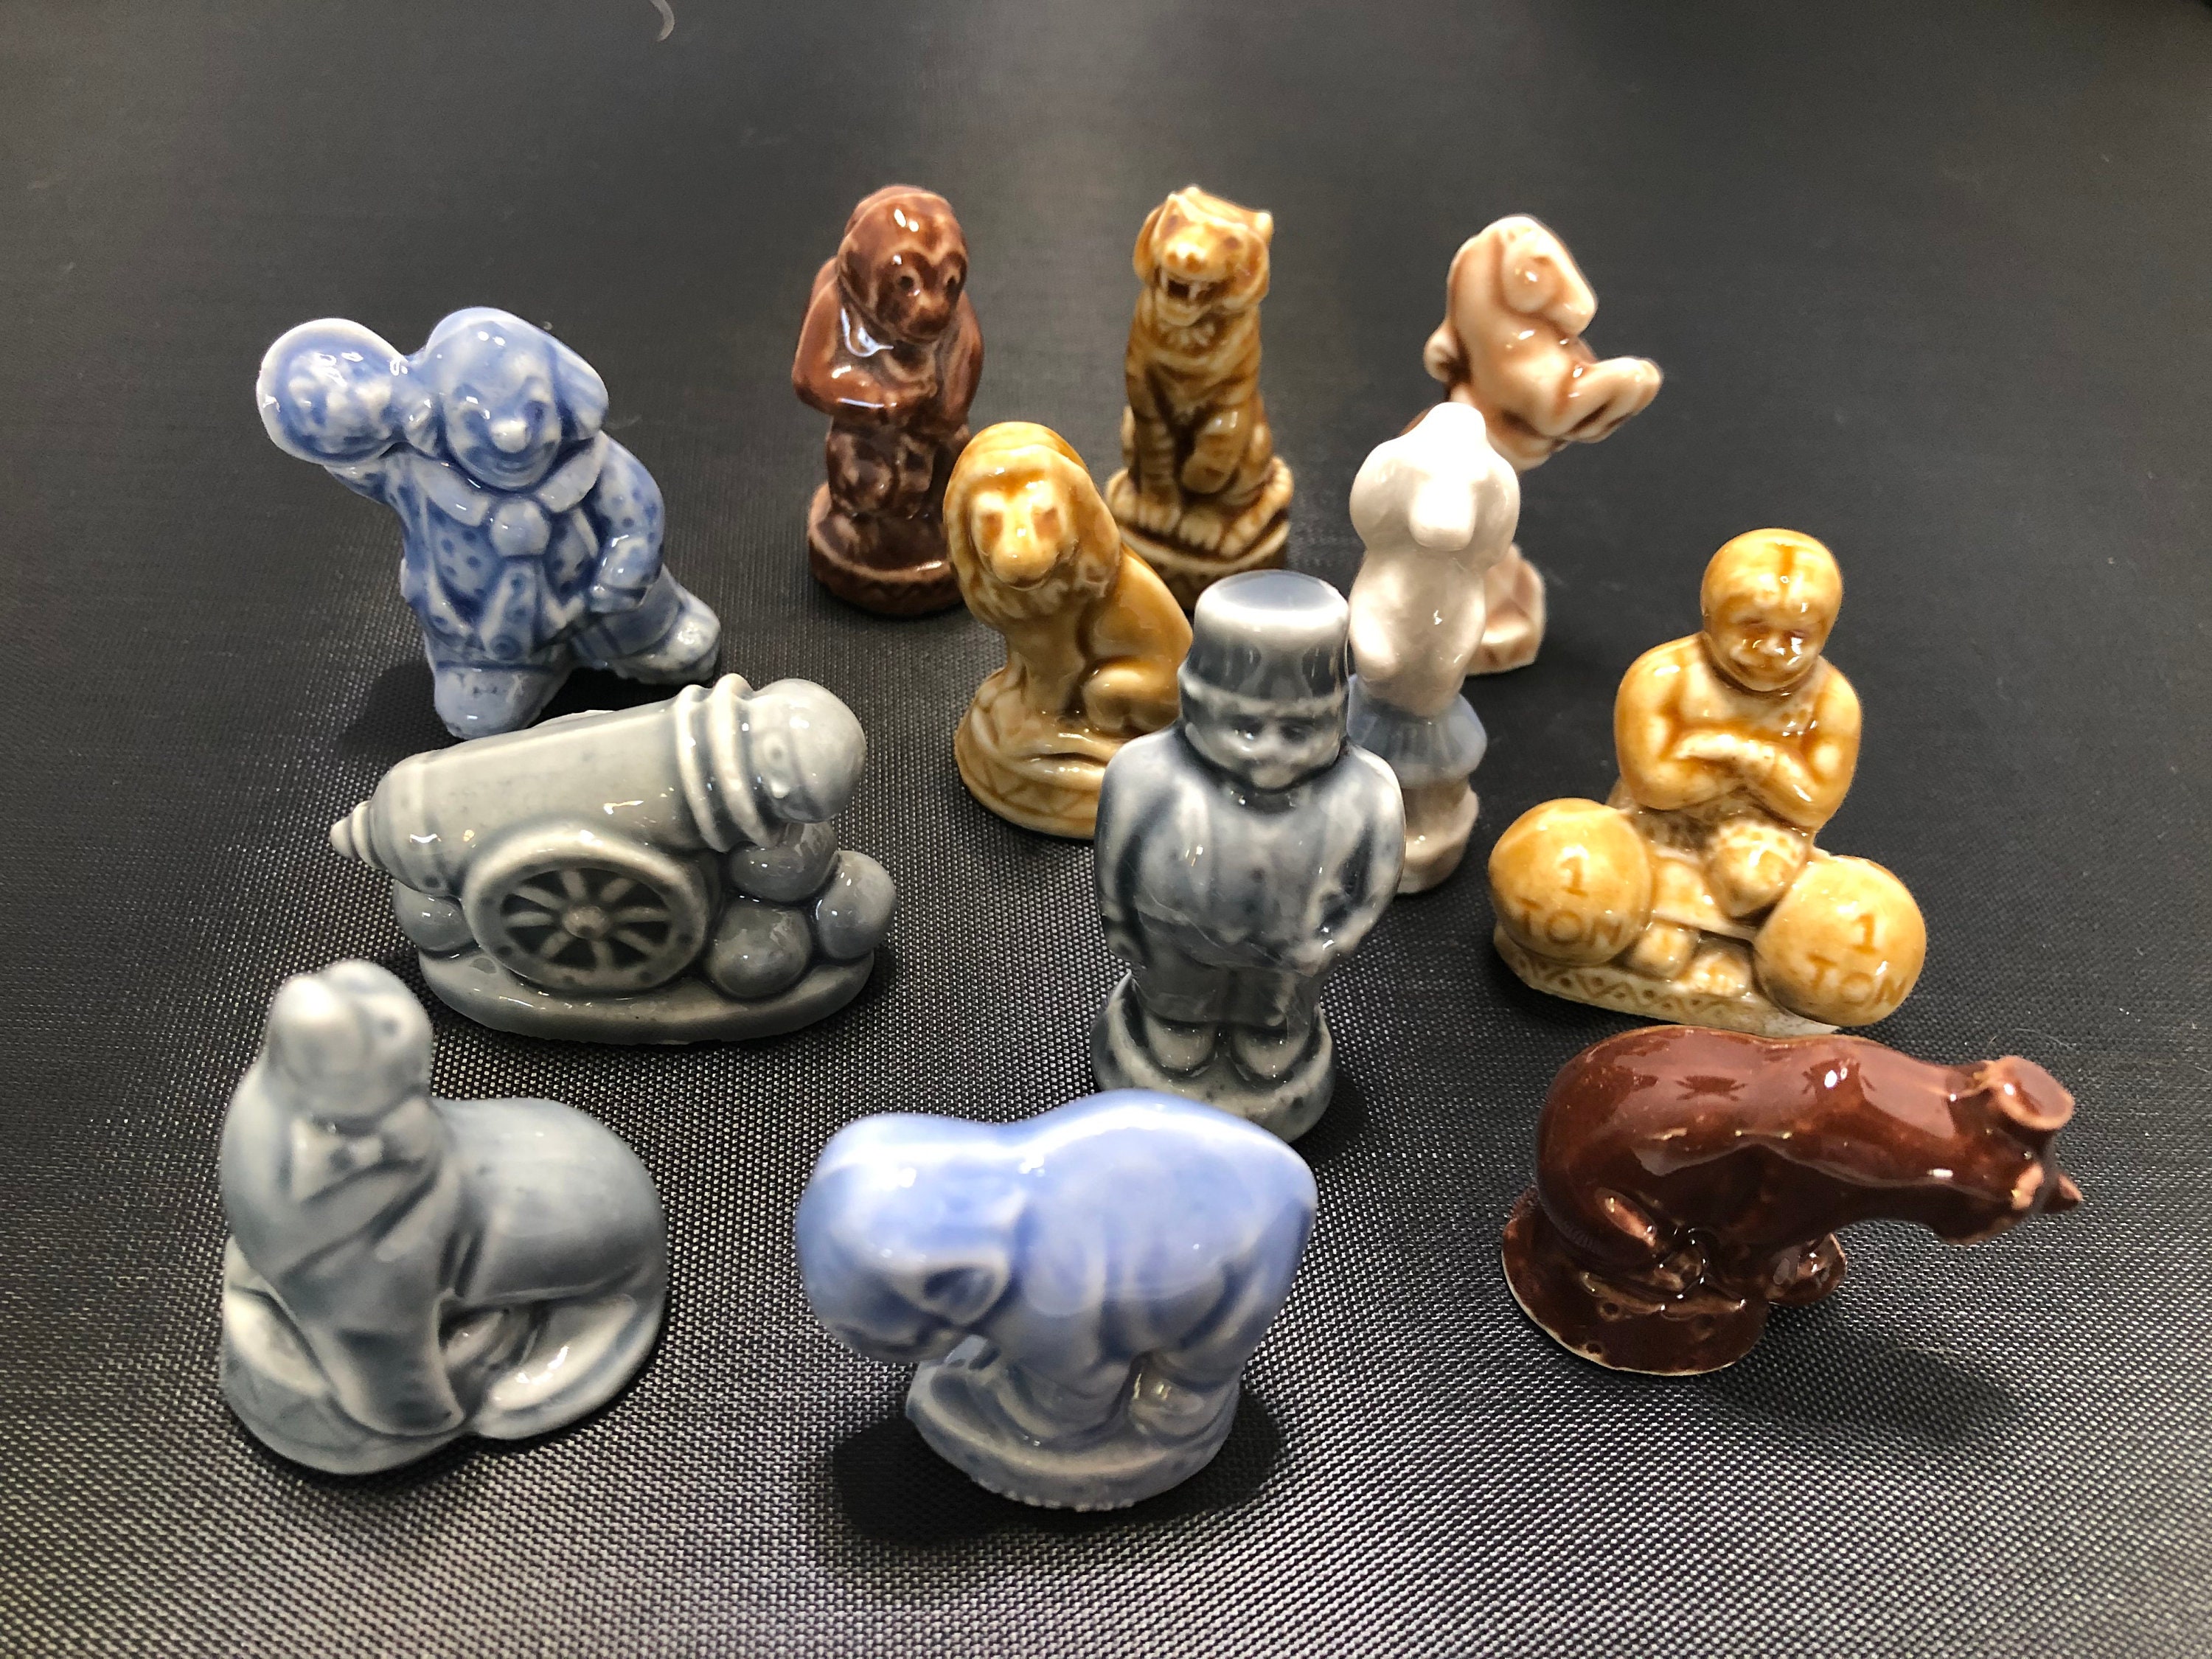 Wade Whimsies Circus Figurines, England, Tiger, Monkey, Bear, Elephant,  Seal, Poodle, Horse, Lion, Clown, Ringmaster, Strongman, Cannonballs -   Israel